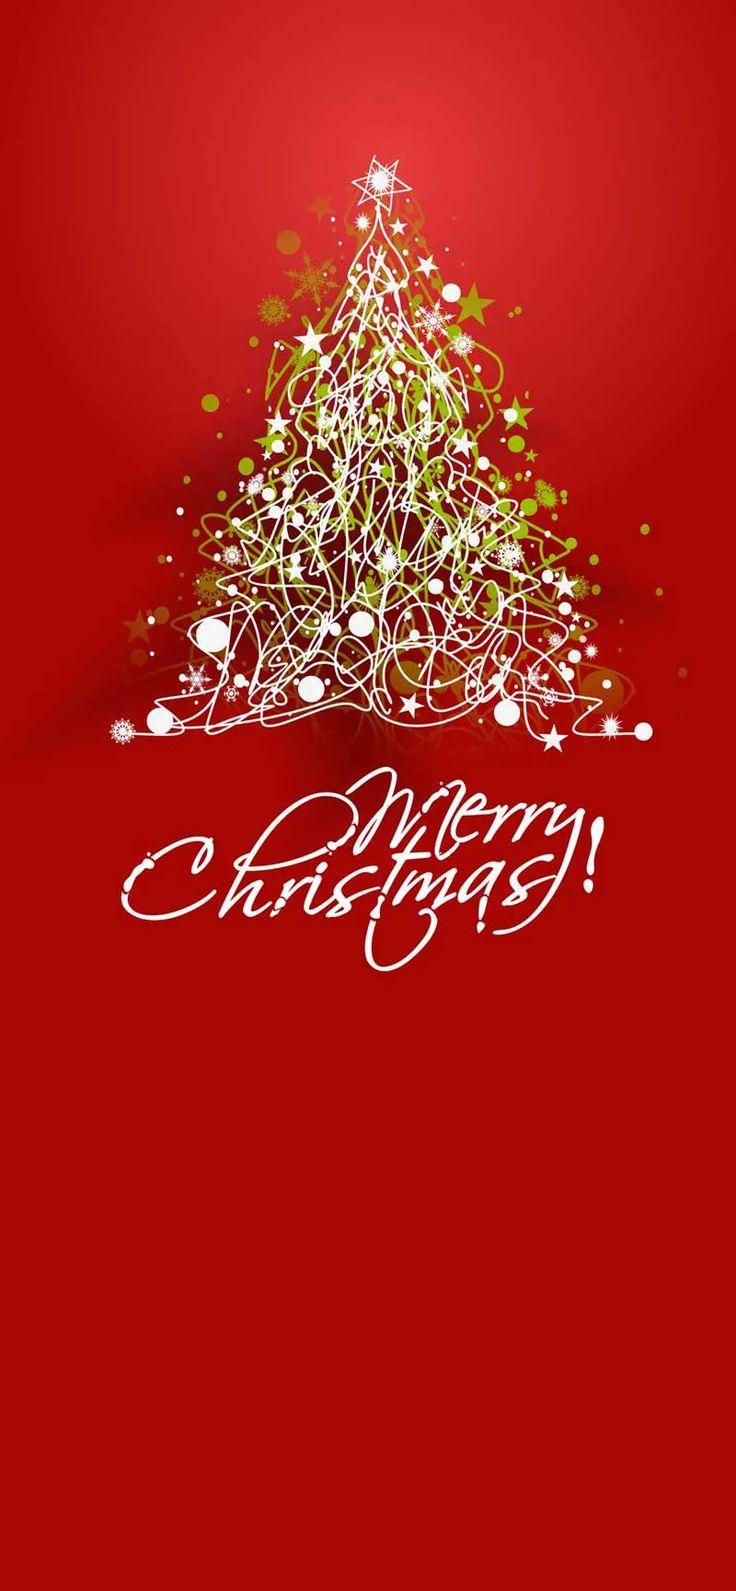  Merry Christmas iPhone Wallpaper HD Free Download